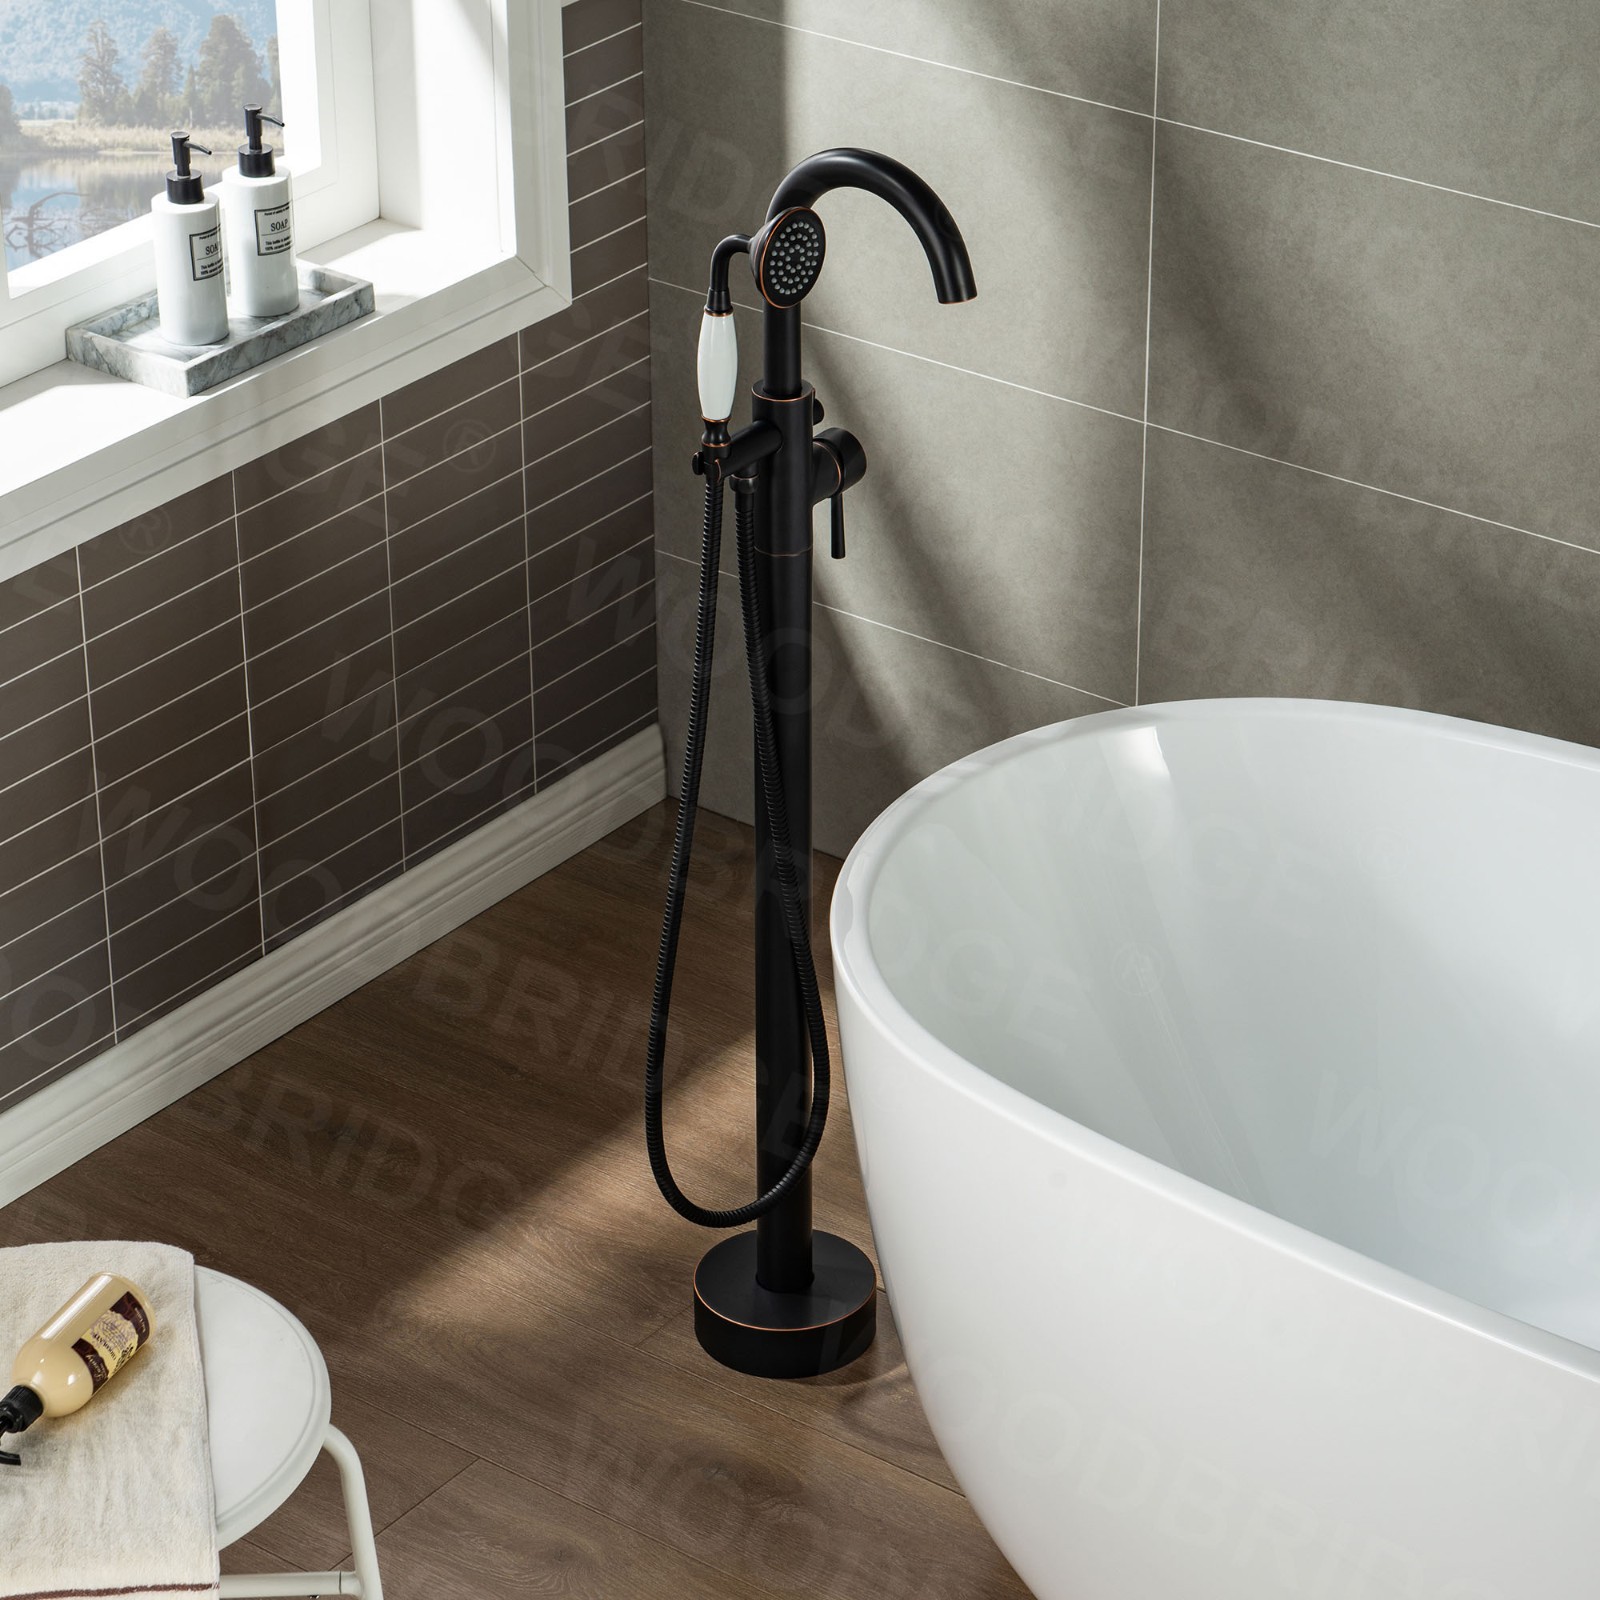  WOODBRIDGE Contemporary Single Handle Floor Mount Freestanding Tub Filler Faucet with Hand Shower in (Oil Rubbed Bronze) Finish,F0010ORBVT_6050